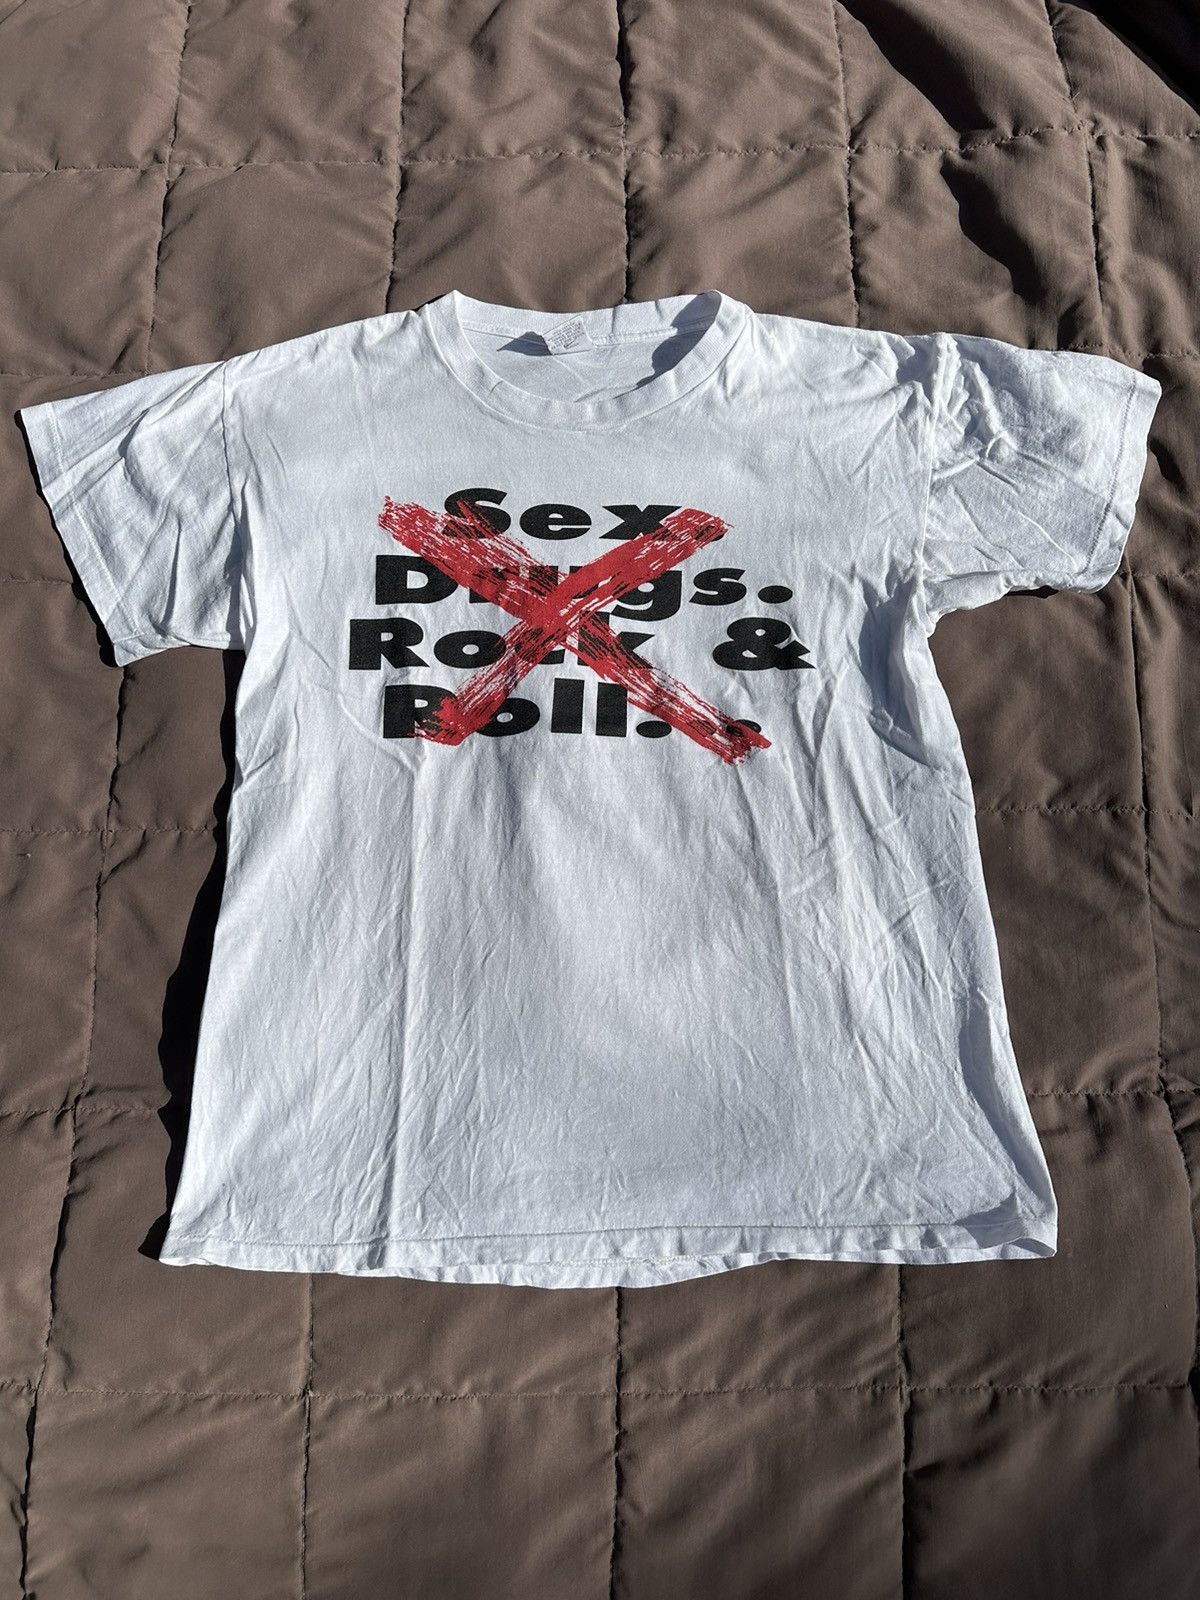 Embroidered T-Shirt - Sex & Drugs & Rock & Roll graphic